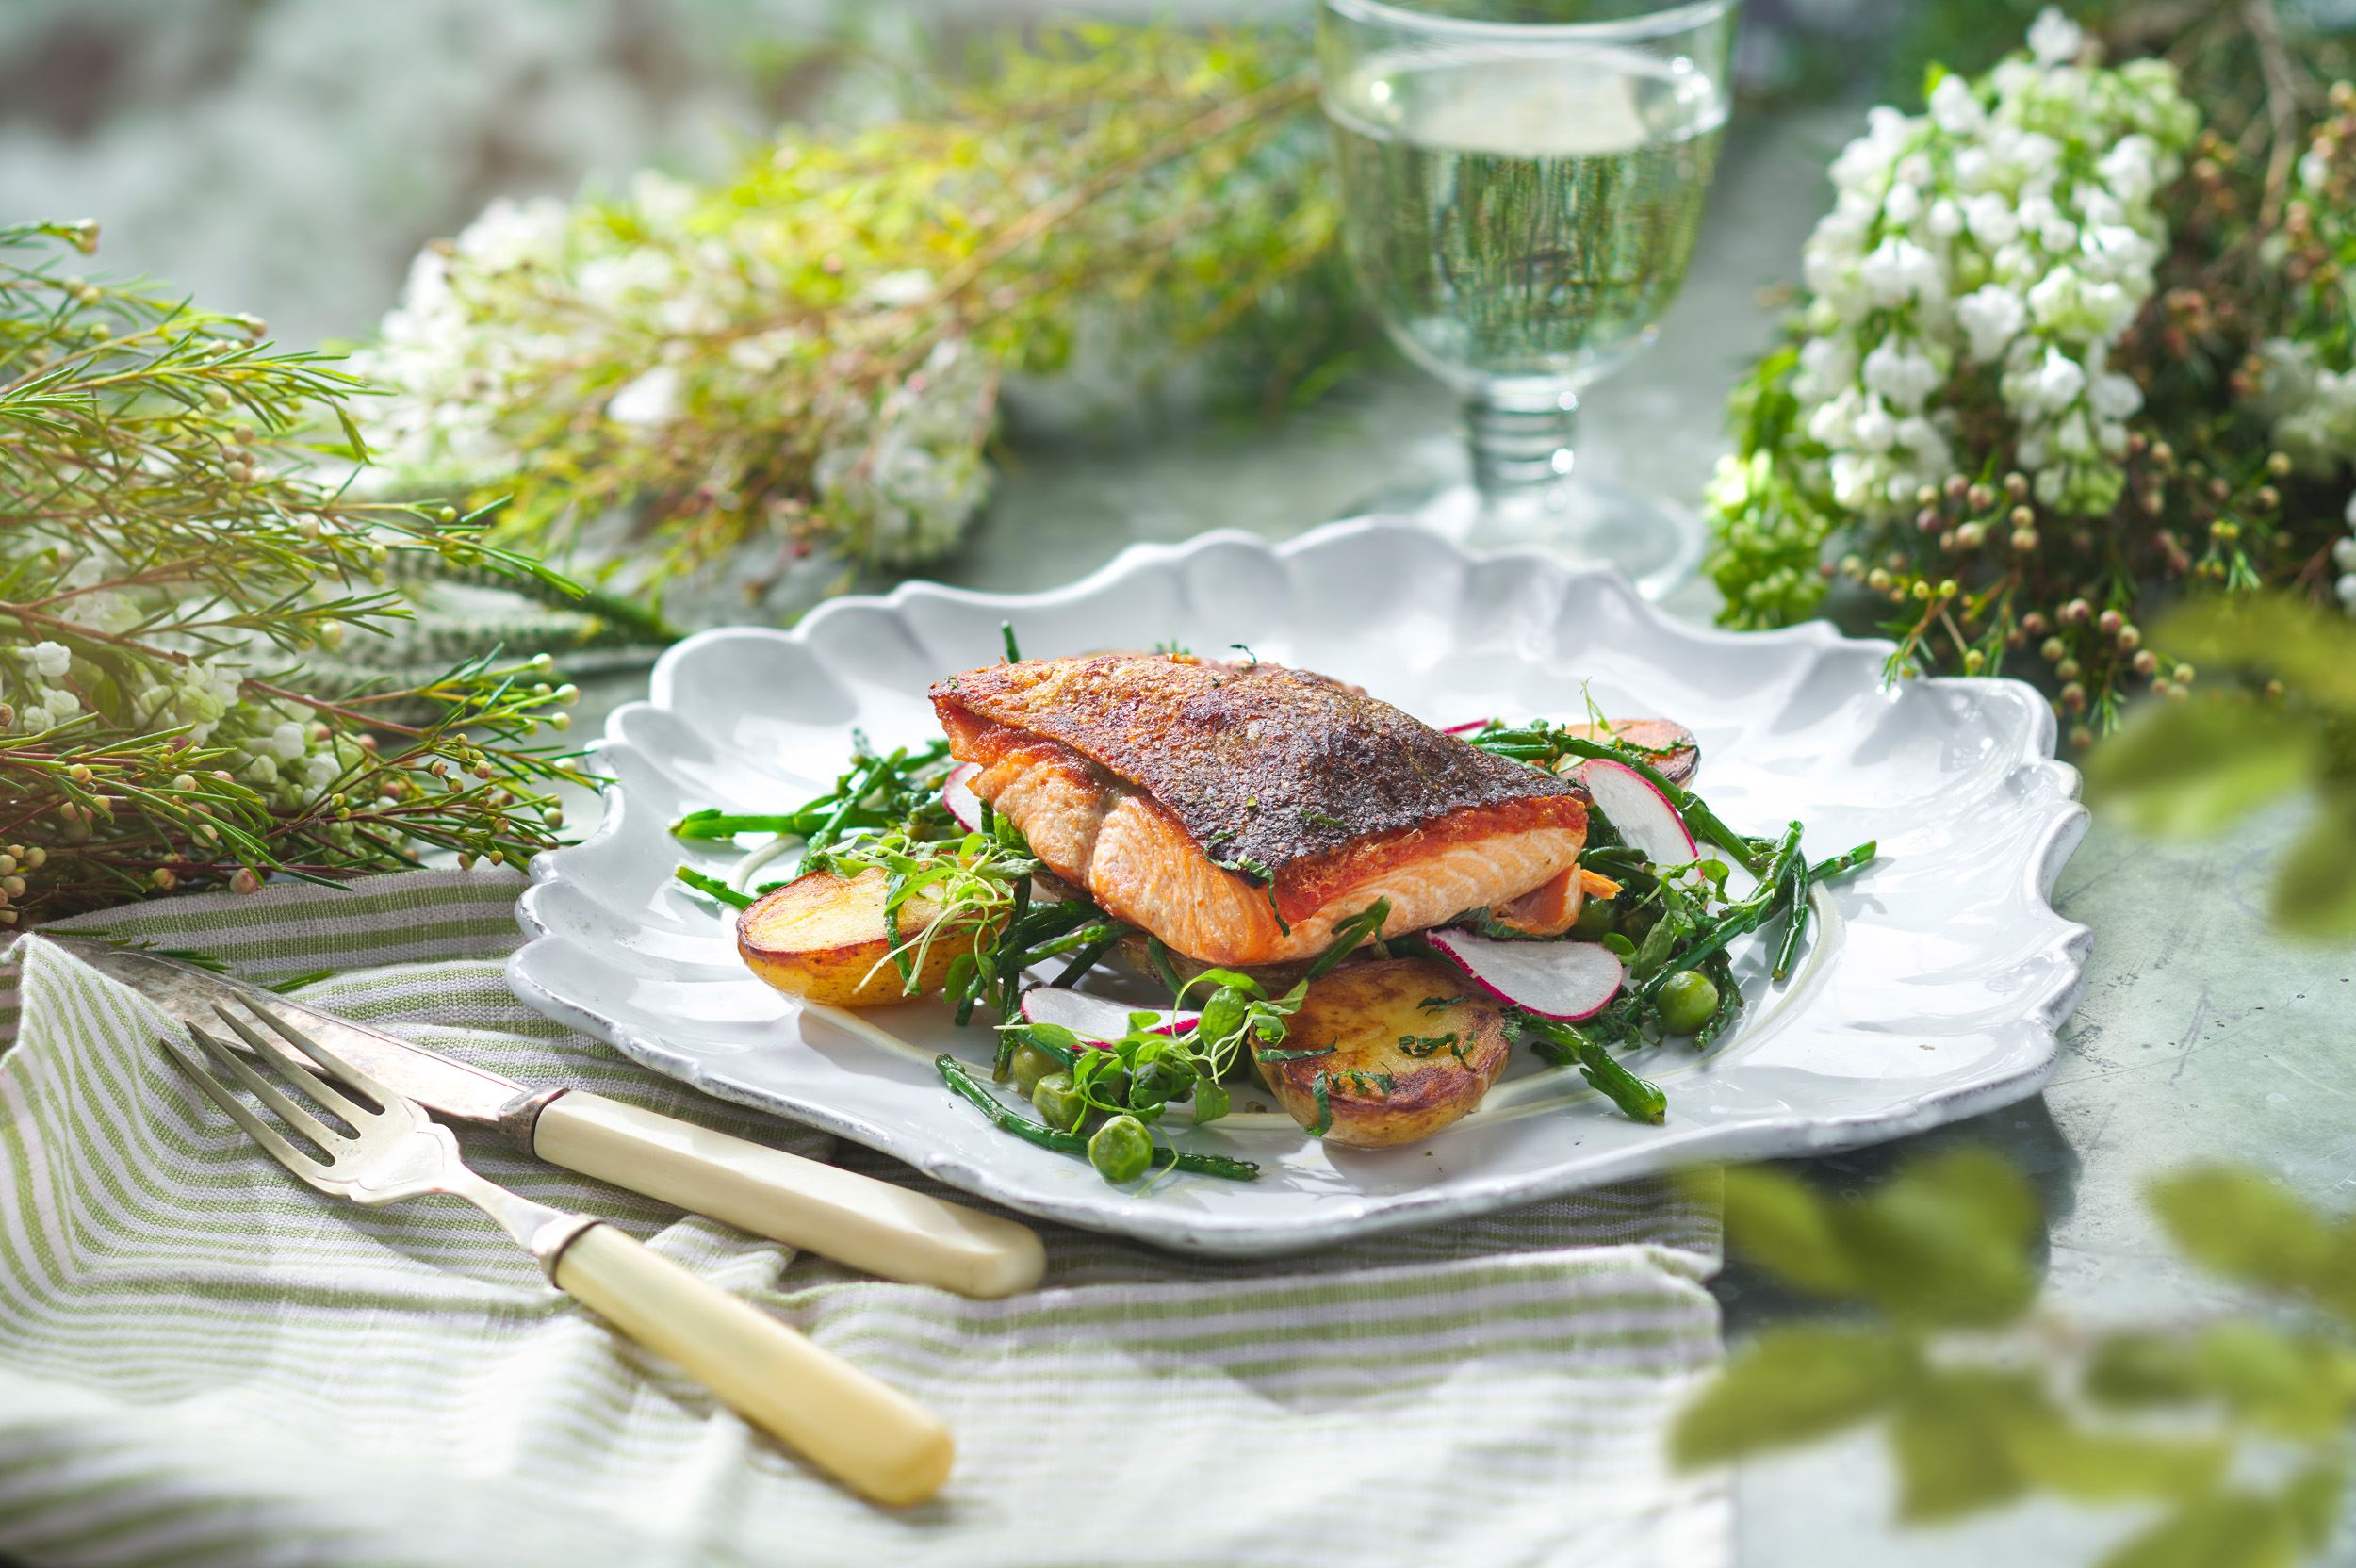 https://www.drakeandmorgan.co.uk/the-refinery-regents-place/wp-content/uploads/2022/03/Seafood-Trout-1.jpg